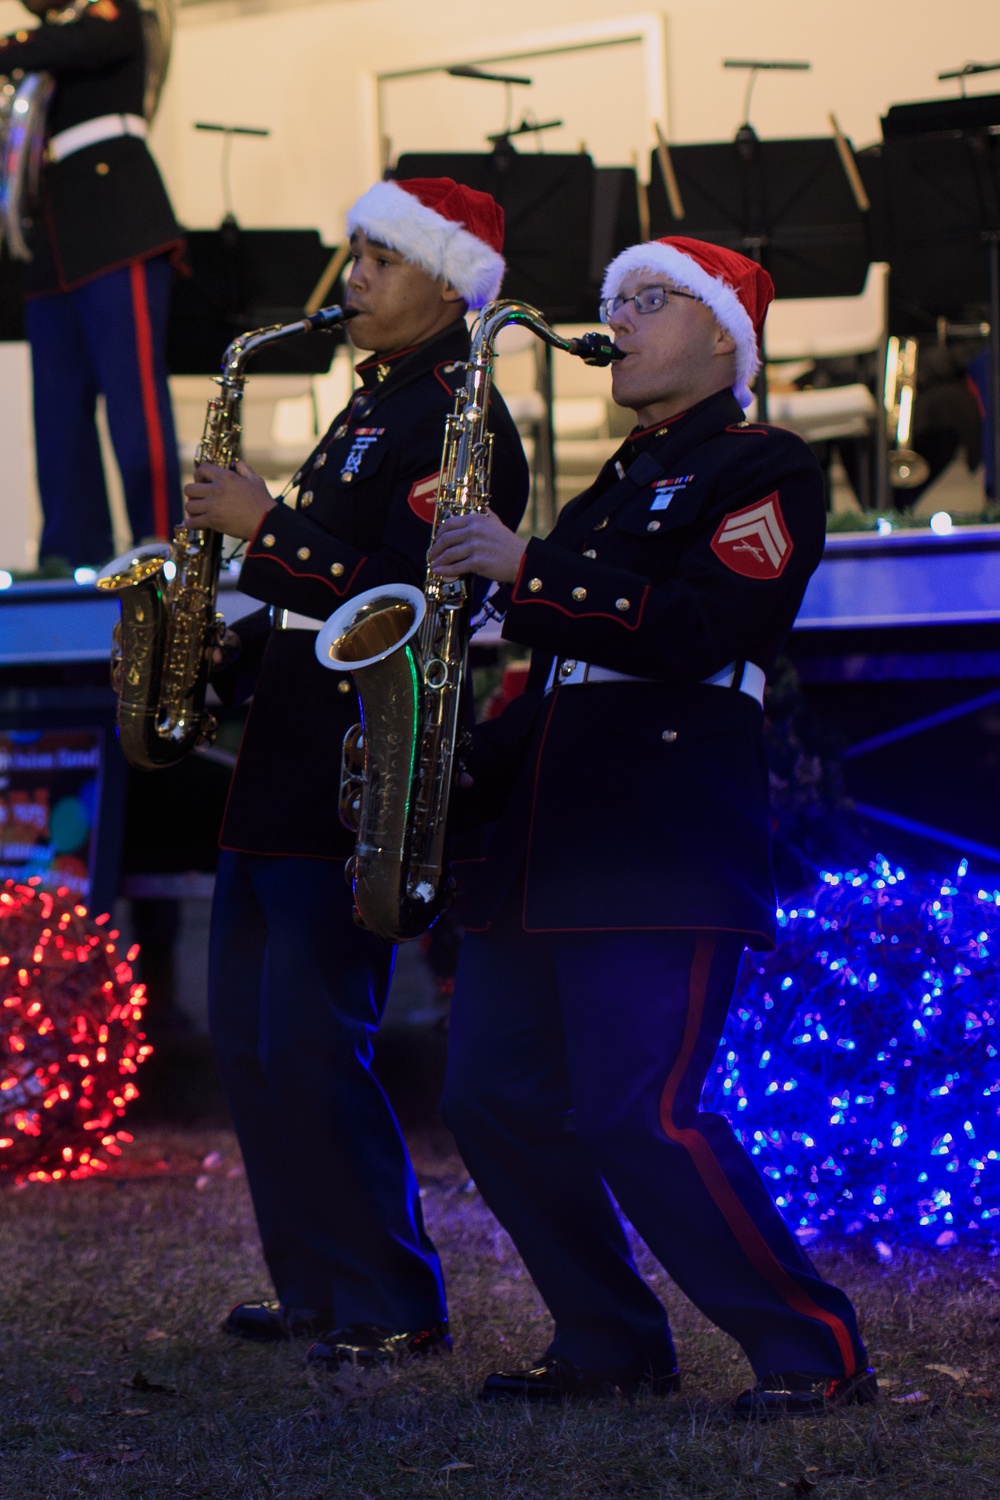 MCAS New River 10th Annual Christmas Tree Lighting Ceremony